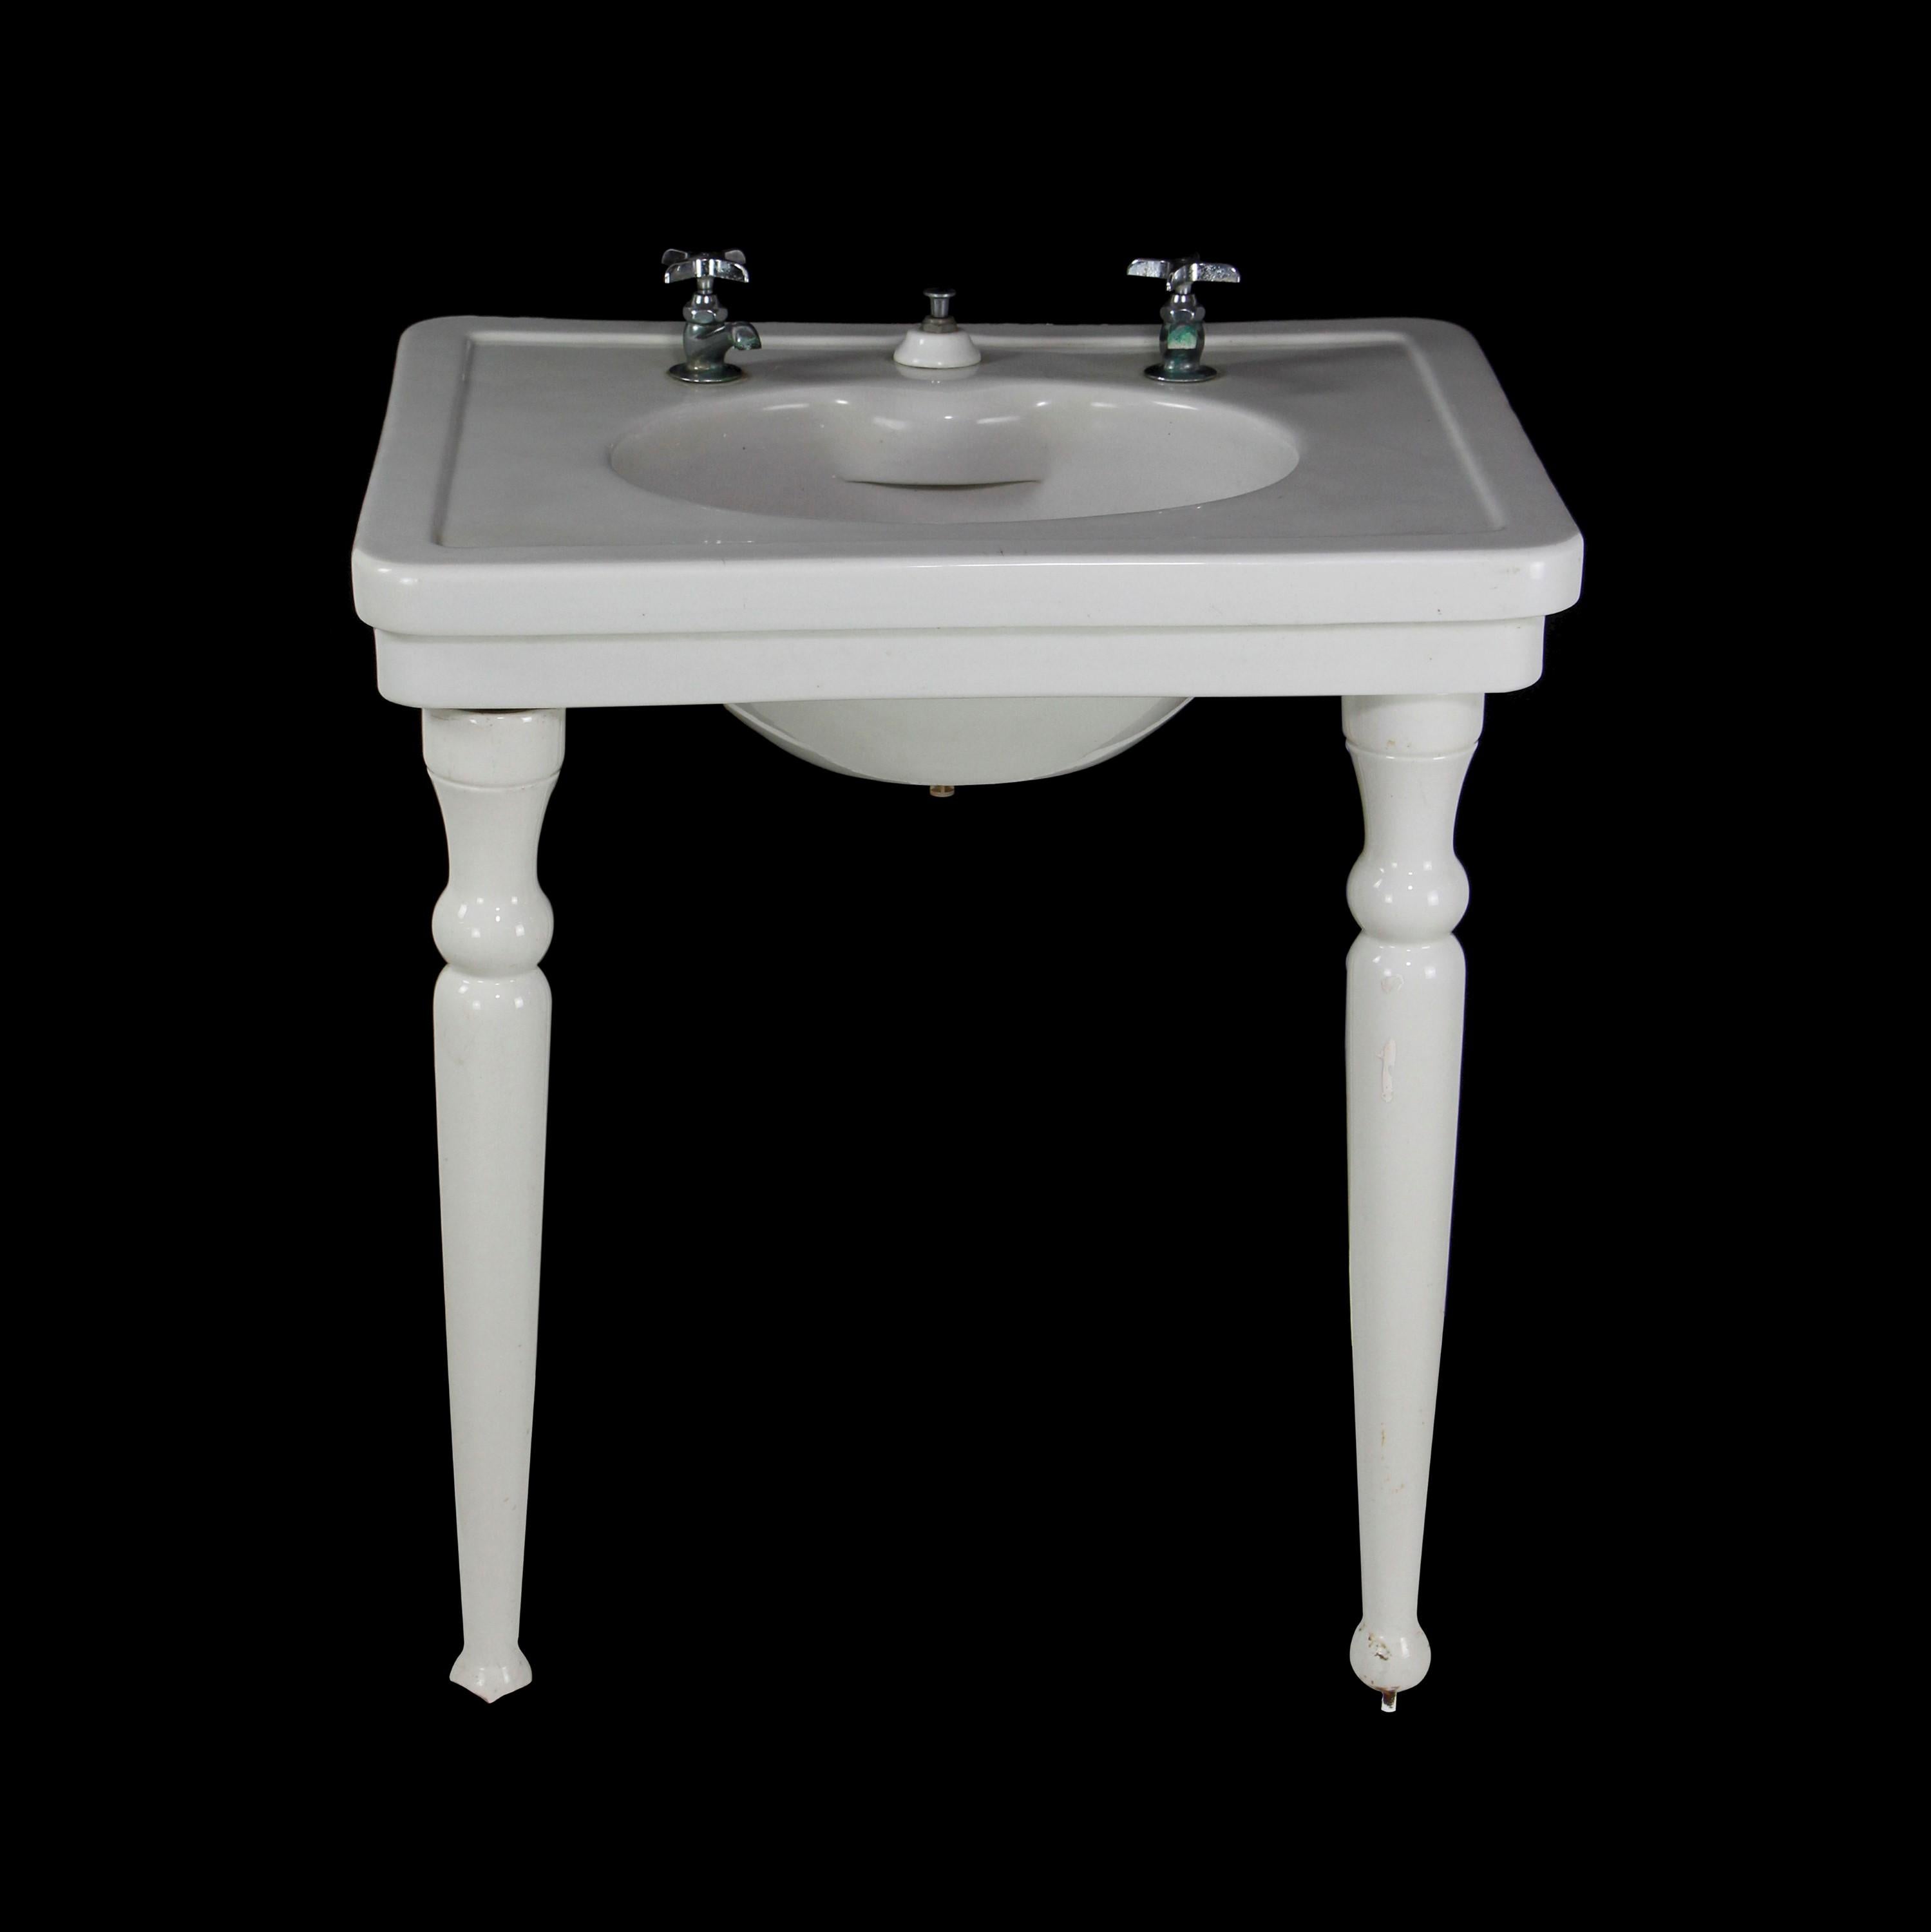 Please note the bottom of the left leg needs repairs. Please see the photos.

1904 white antique vitreous porcelain sink with two matching legs in front and wall mounted in back. This comes with the original hardware. Patented April 5, 1904. Made